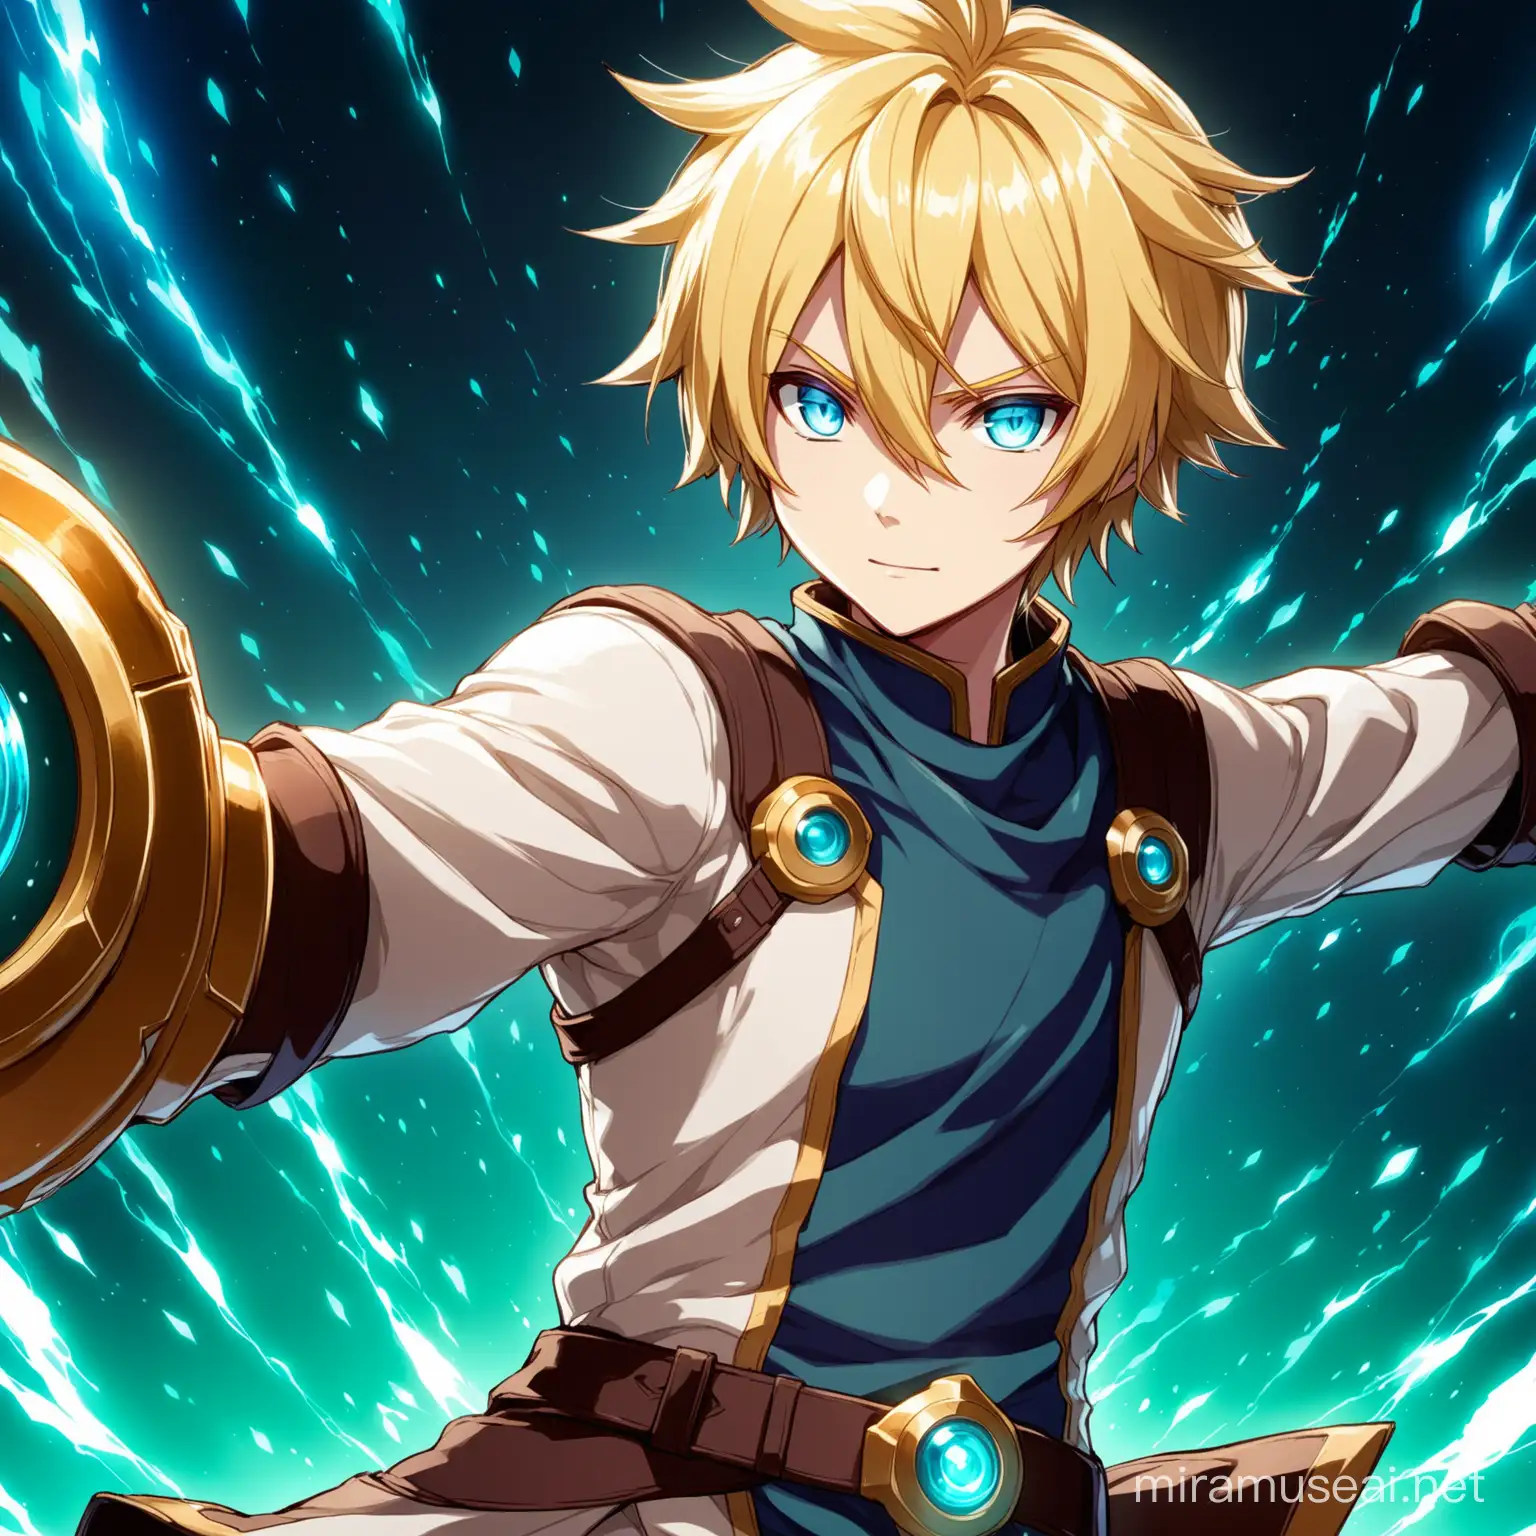 ezreal from league of legends anime